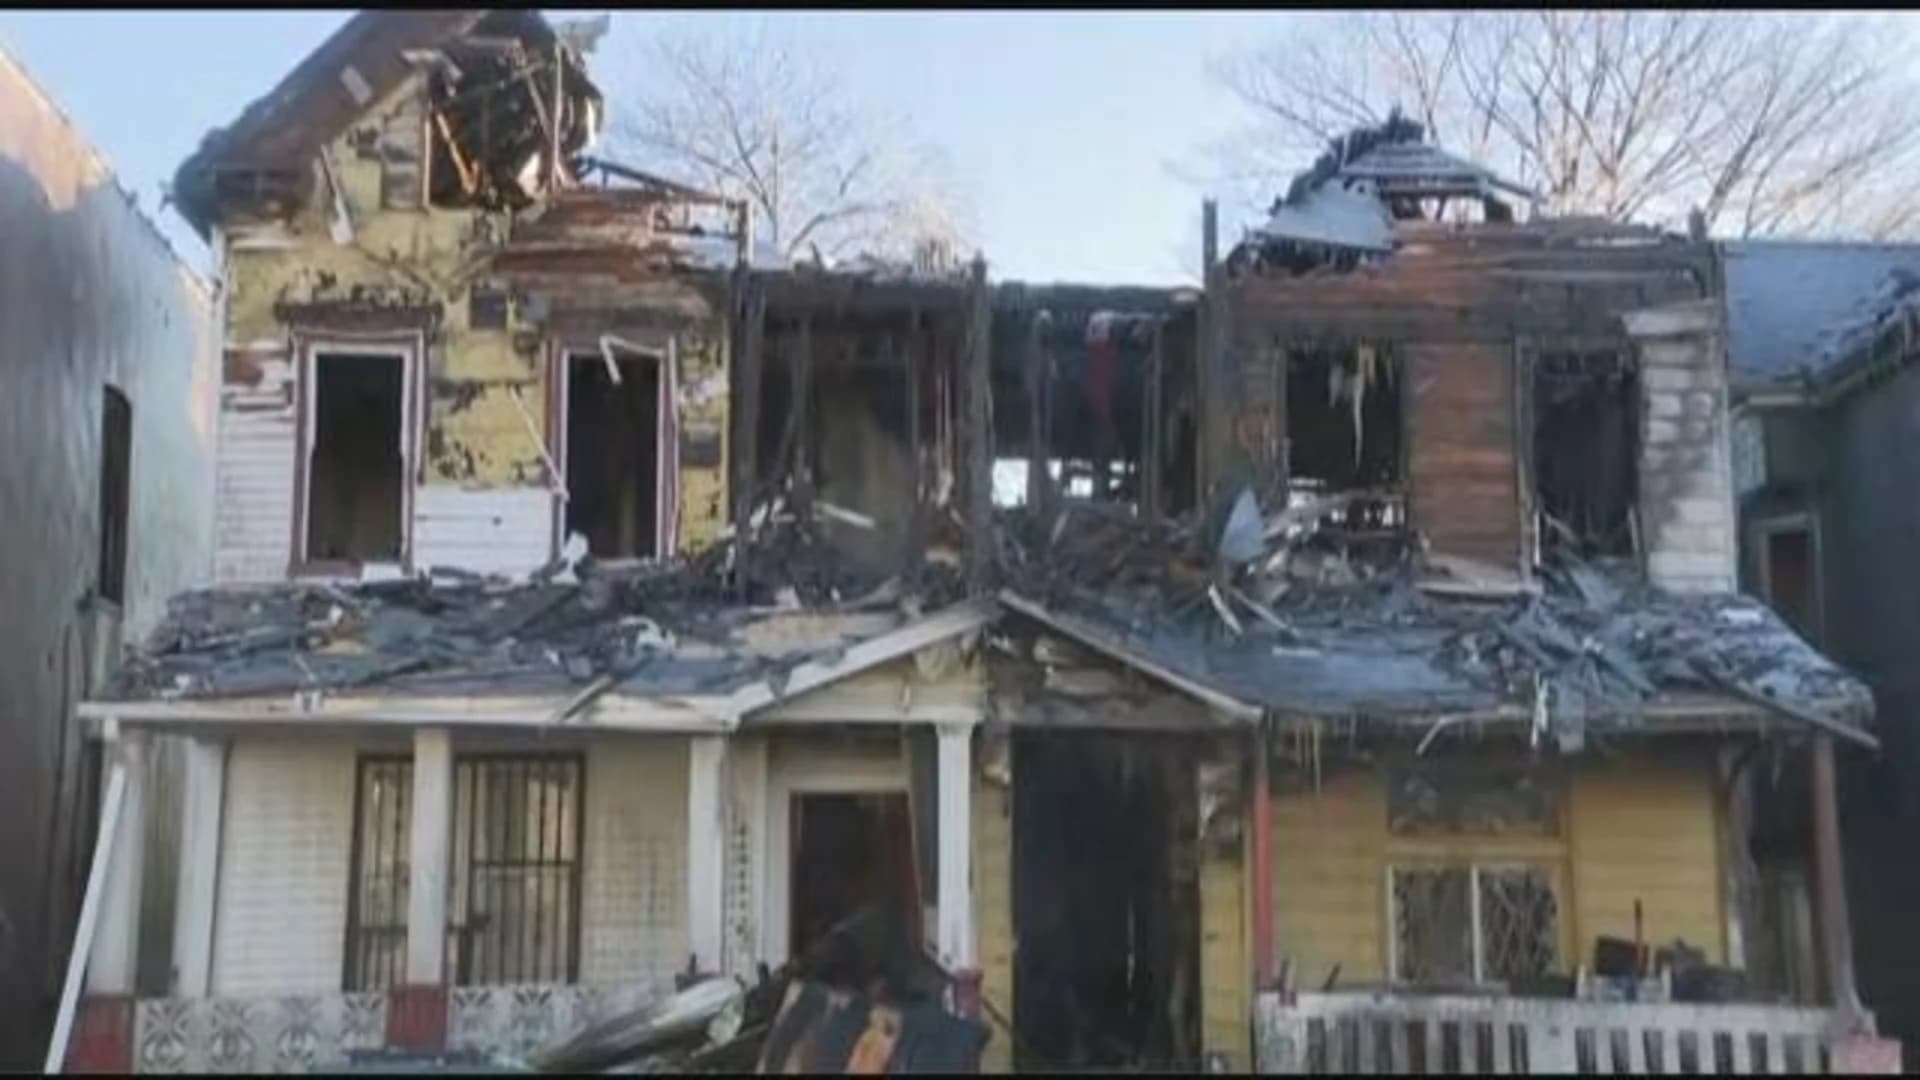 13 displaced after 4-alarm fire erupts at Cypress Hills homes